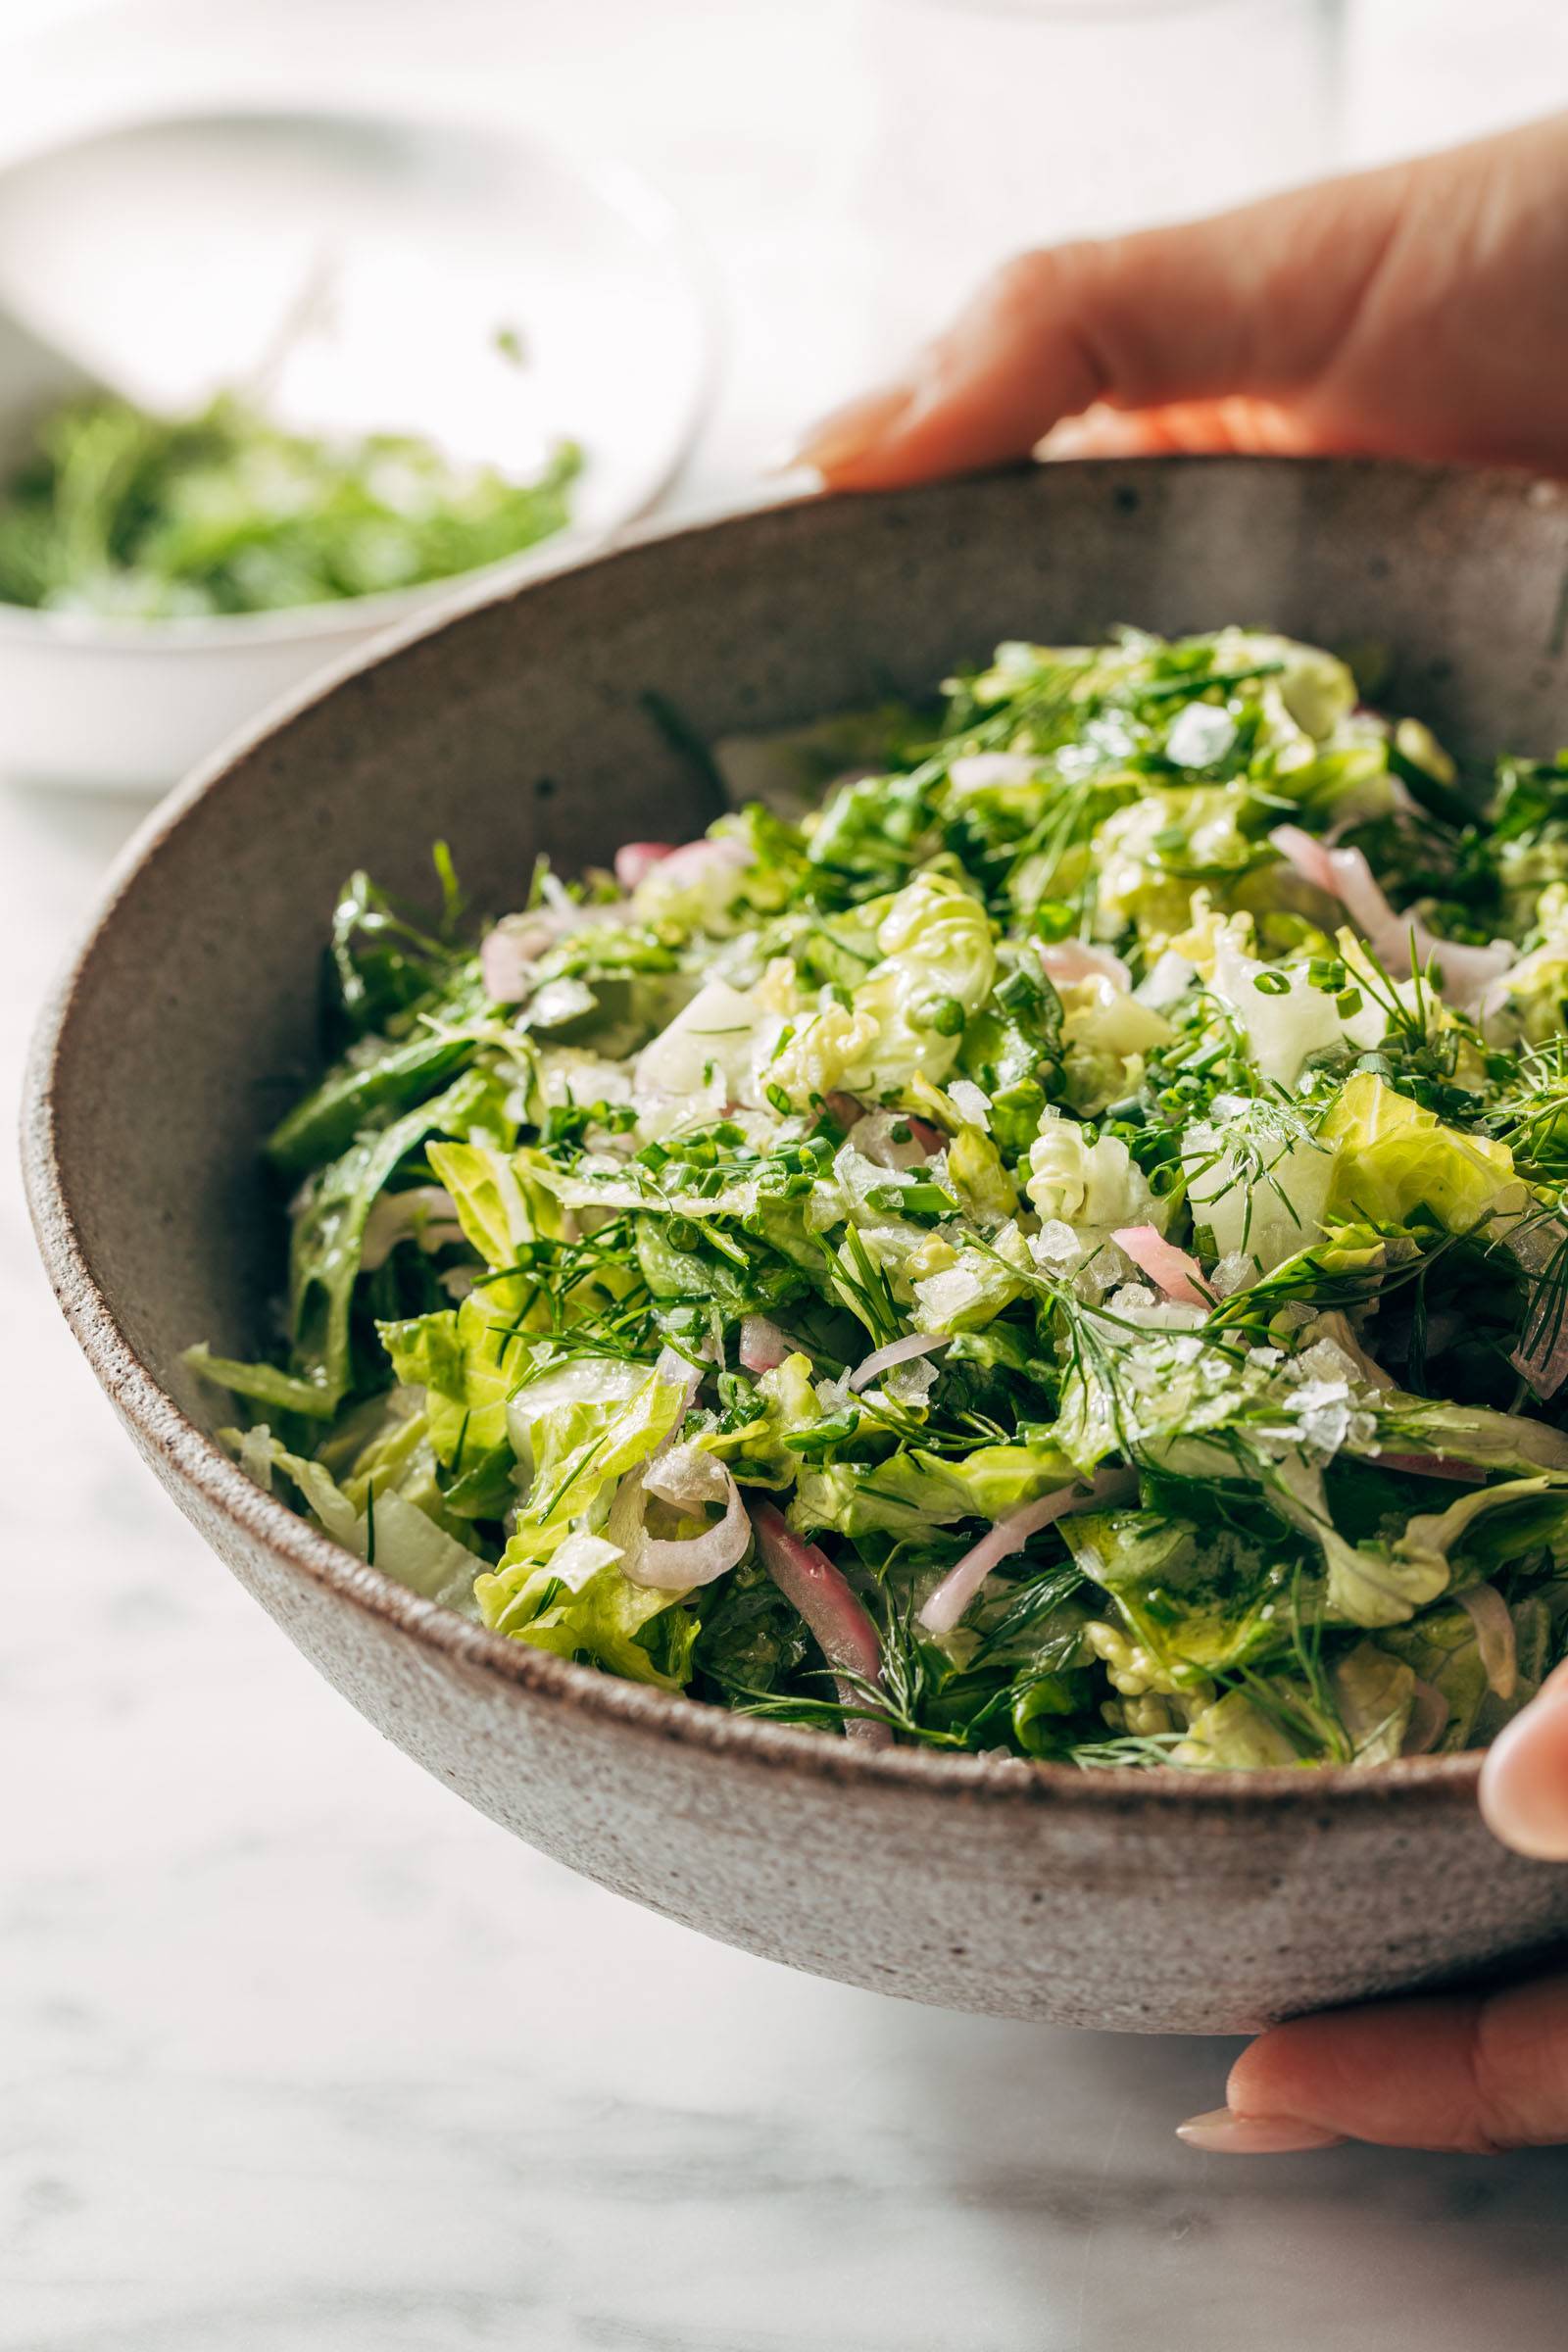 Salad with lettuce, fresh herbs, and pickled onions in a bowl.